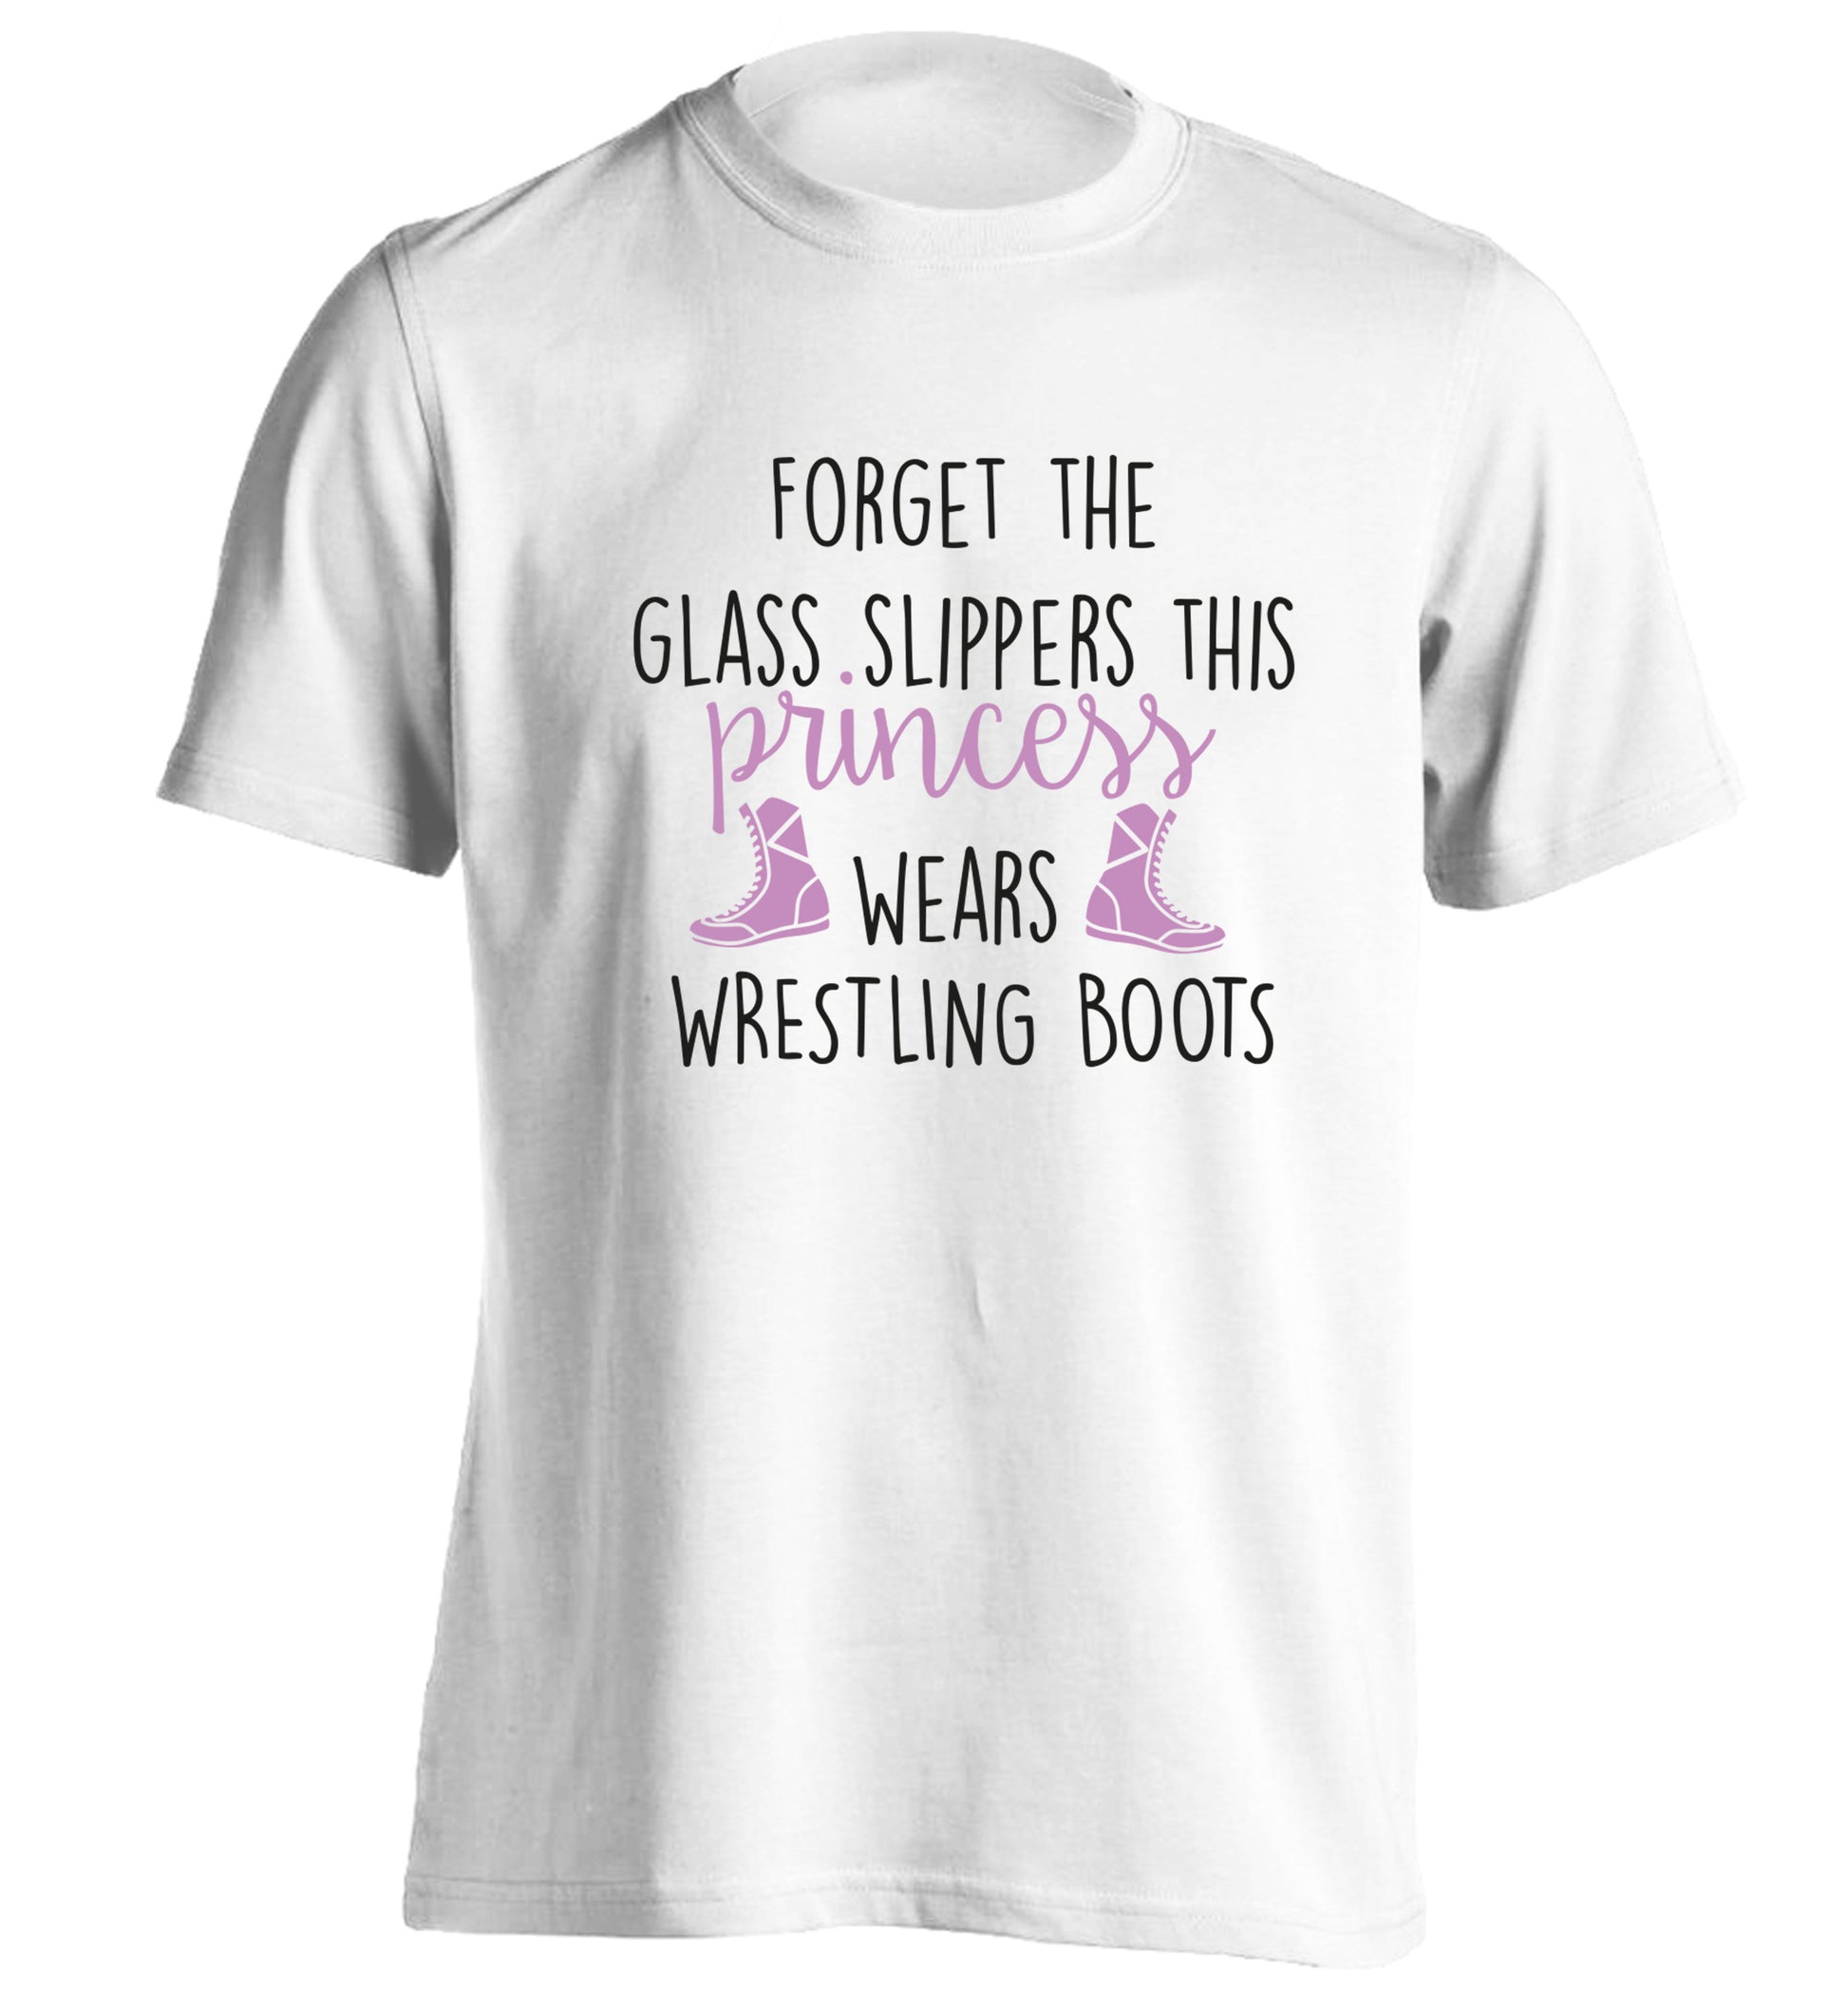 Forget the glass slippers this princess wears wrestling boots adults unisex white Tshirt 2XL